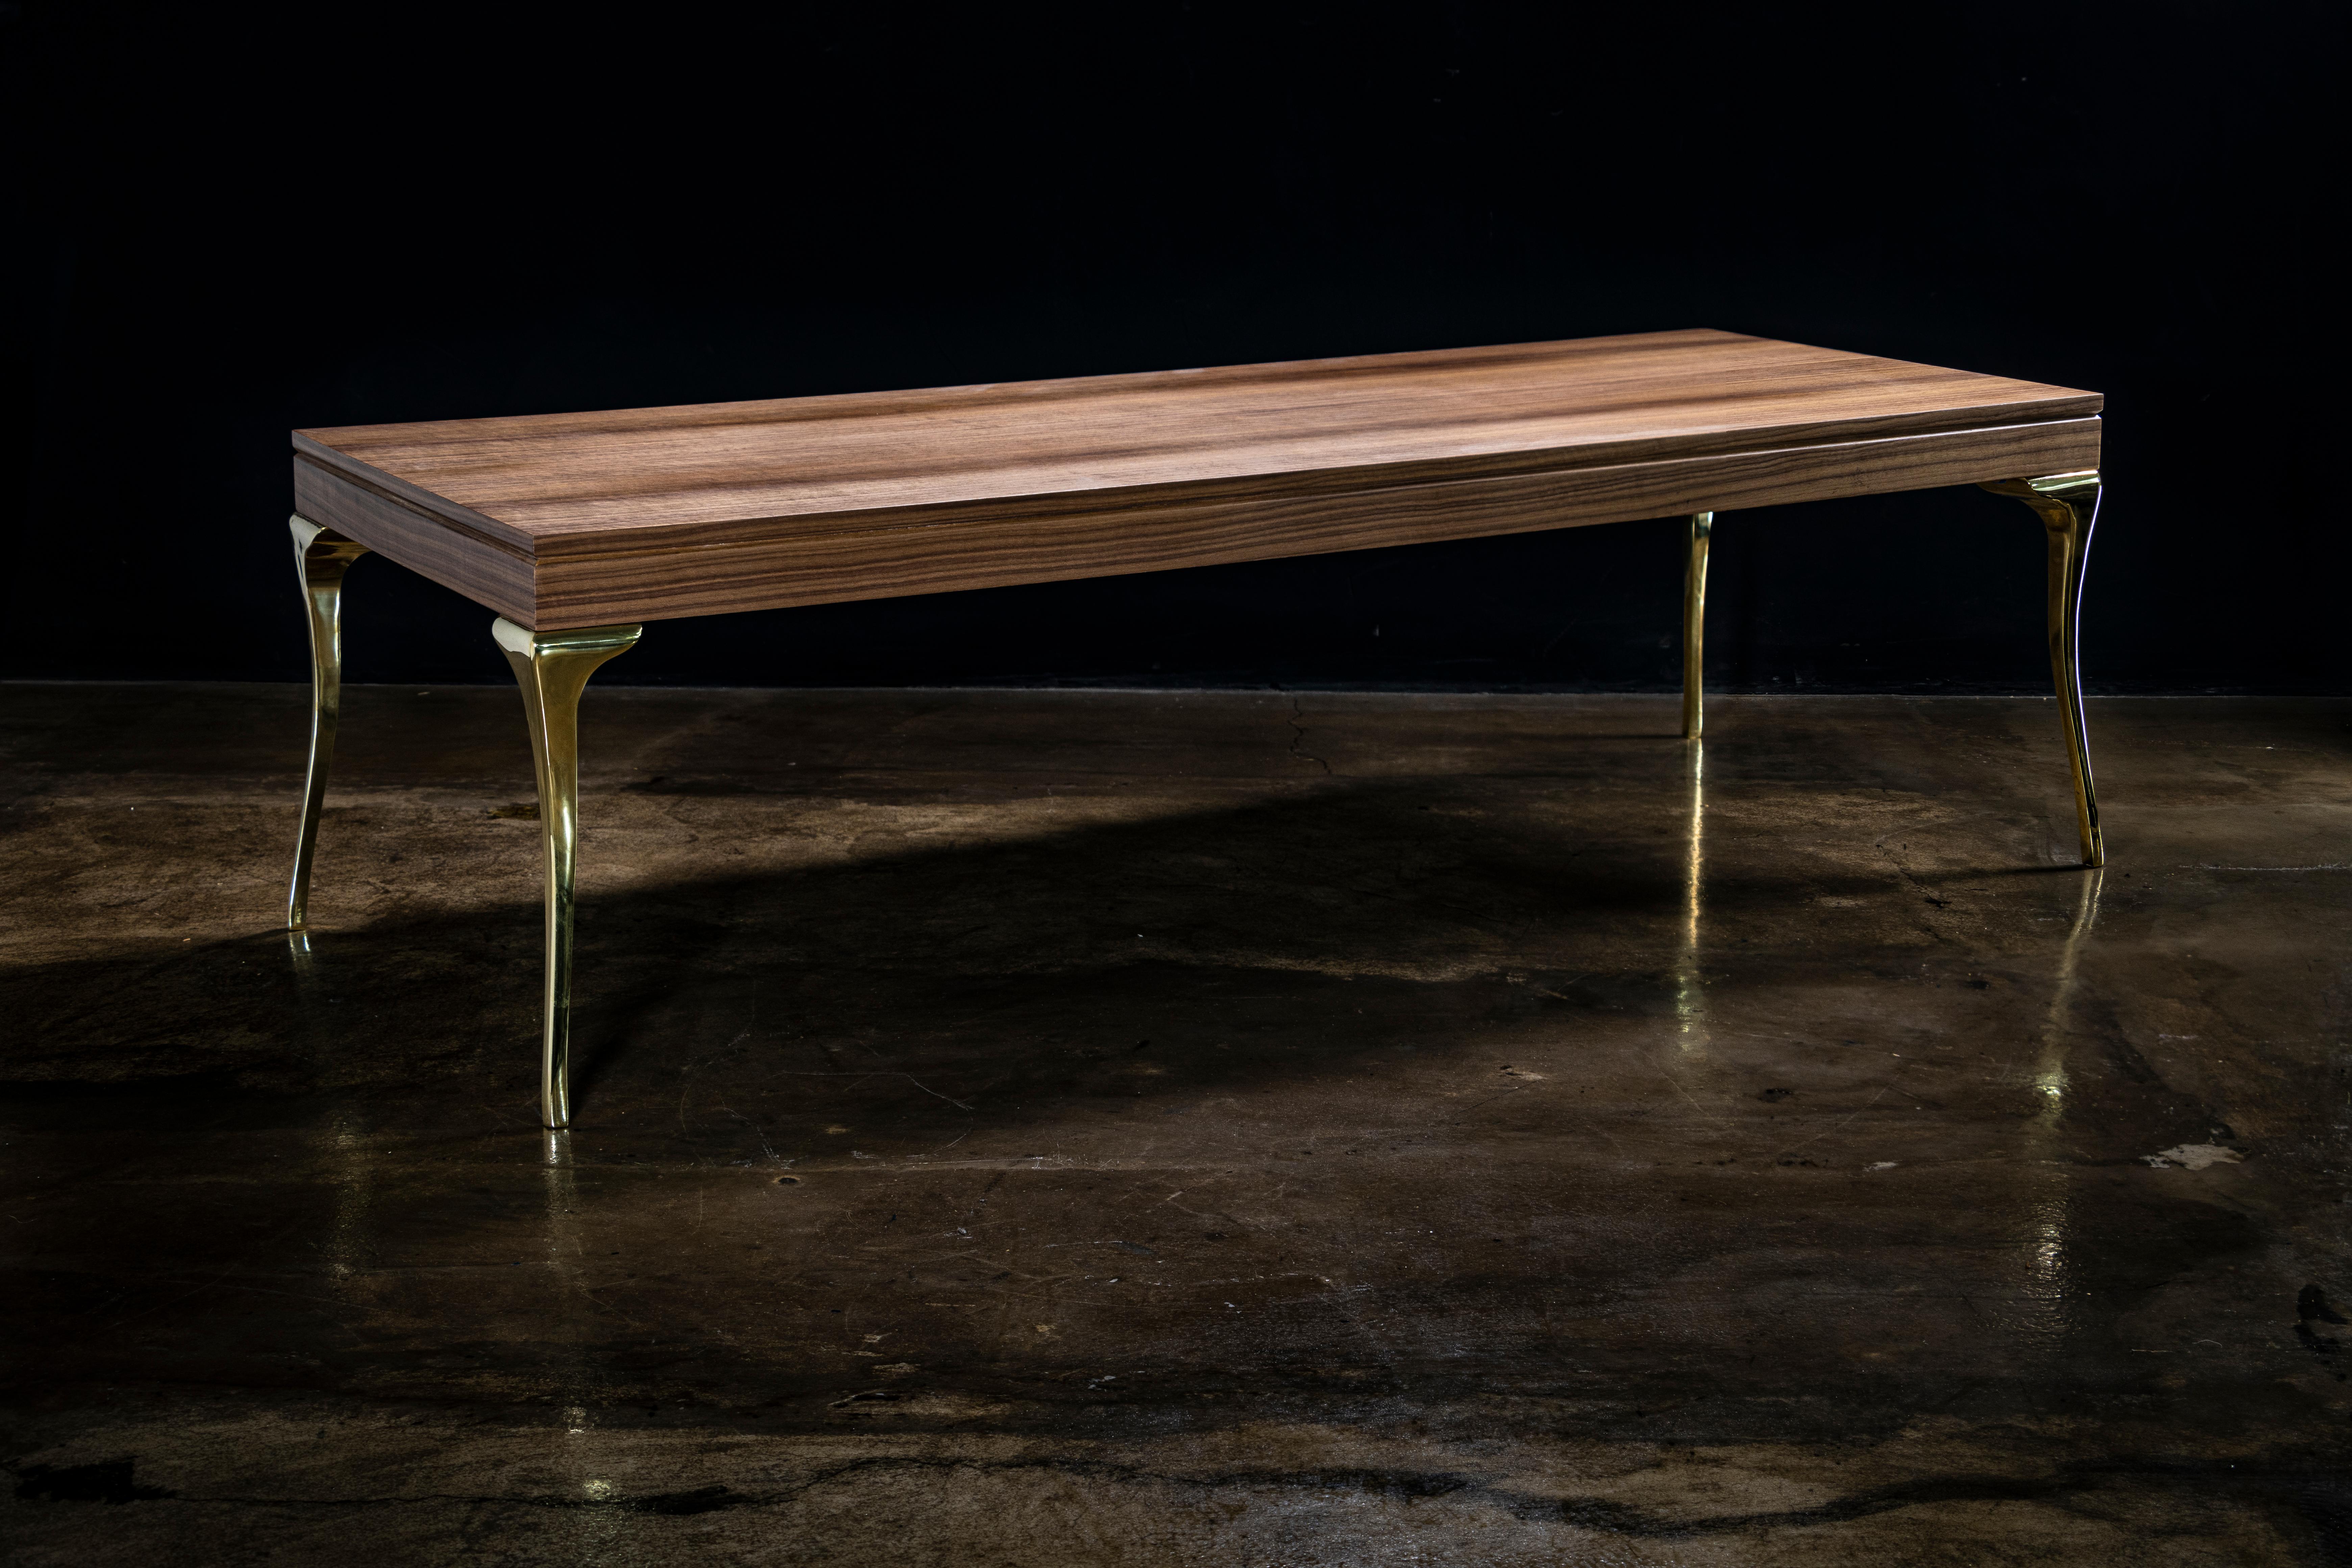 The Enzio Coffee Table features a modern take on a classic Queen Anne form in its cast bronze legs.  Available as shown with a walnut top, or in any size, shape or material including stone, metal, or other wood species and finishes.